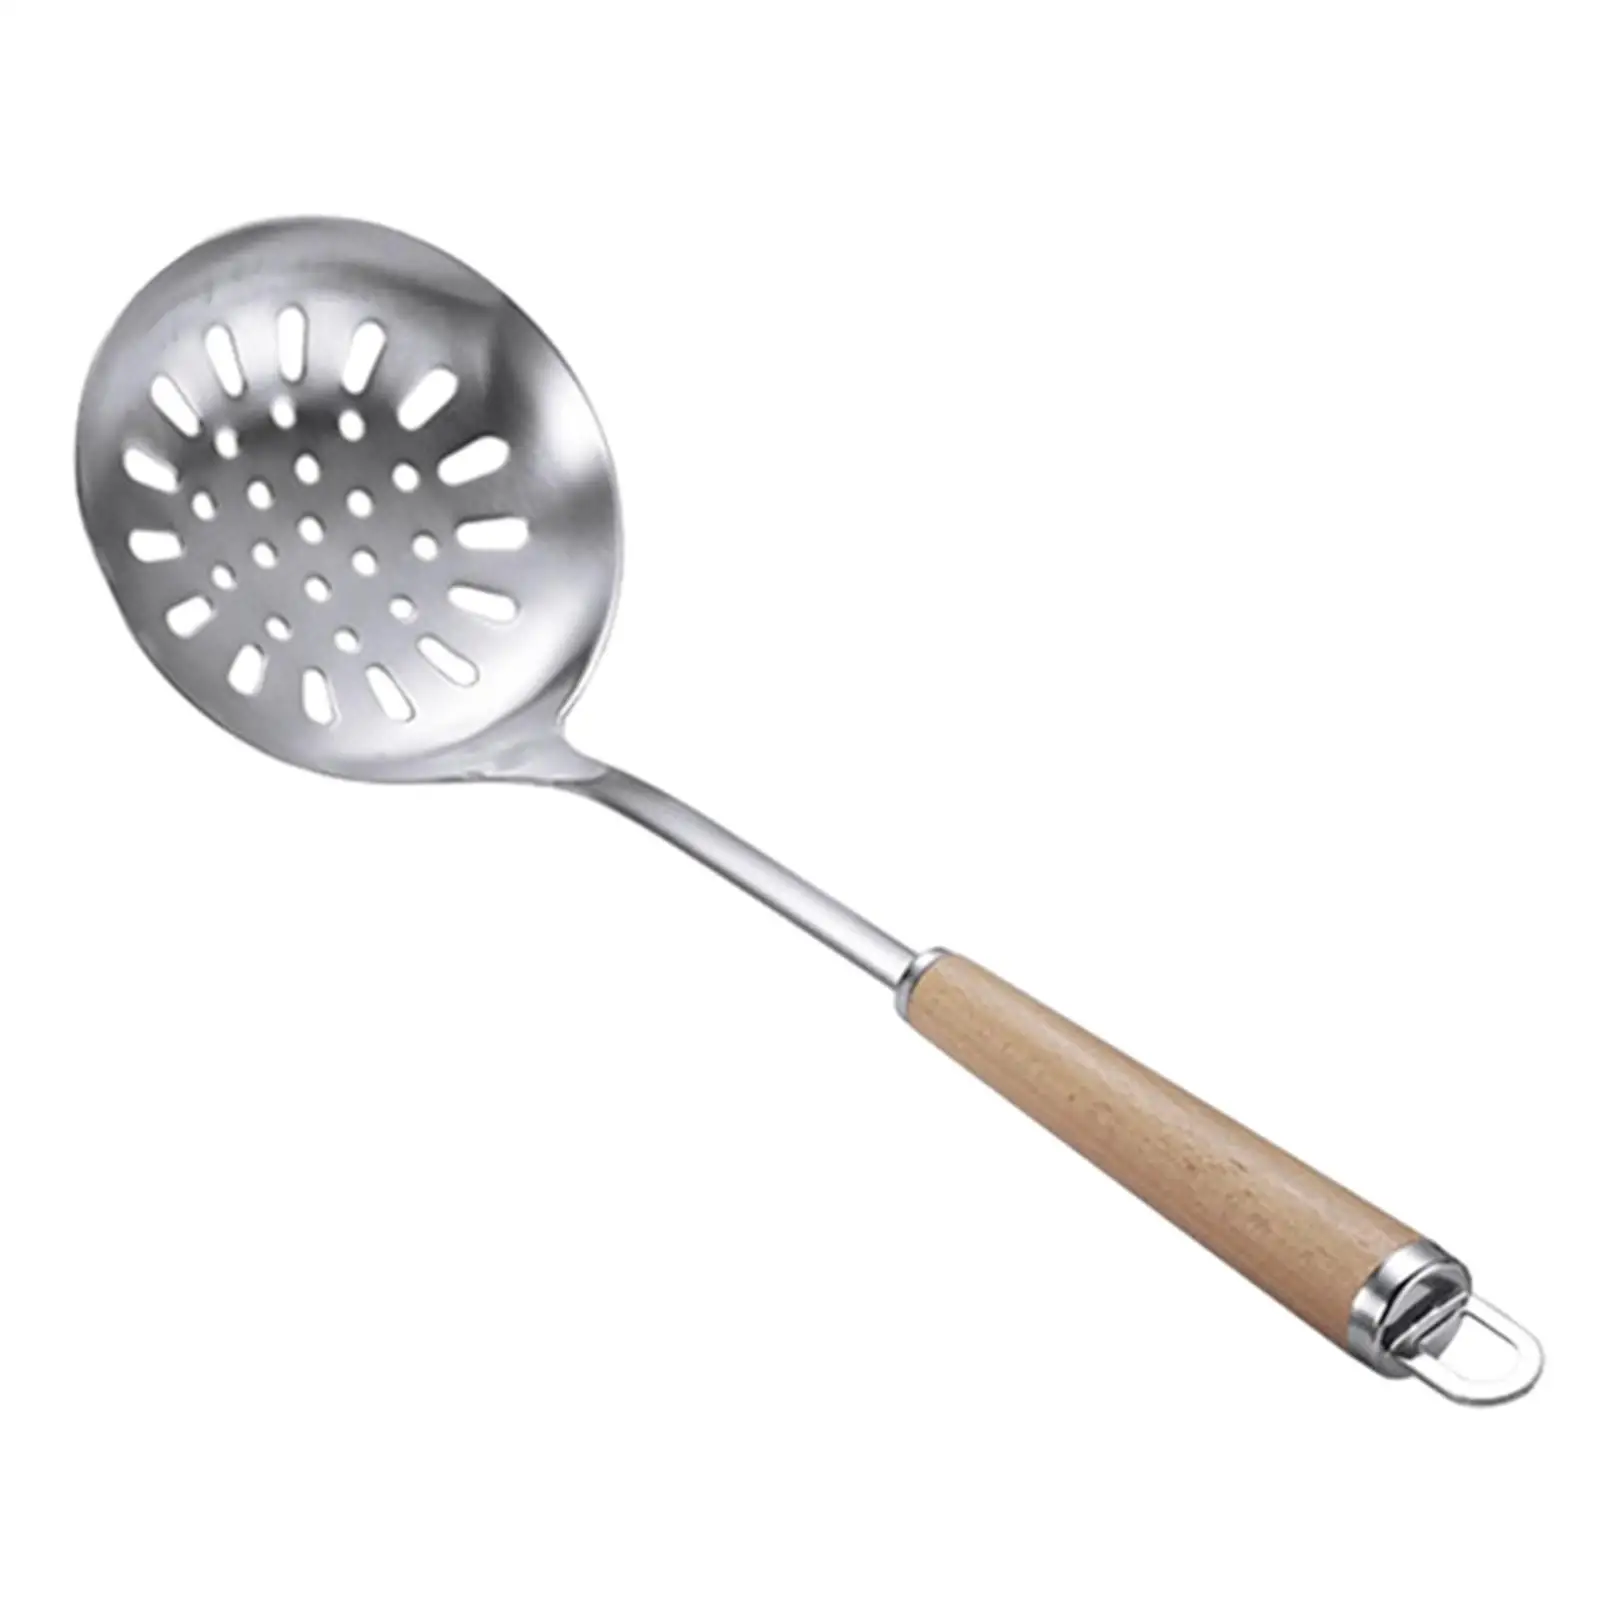 Stainless Steel Cooking Utensils Multifunctional Easy to Clean Practical Cookware for Camping Cooking Picnic Kitchen